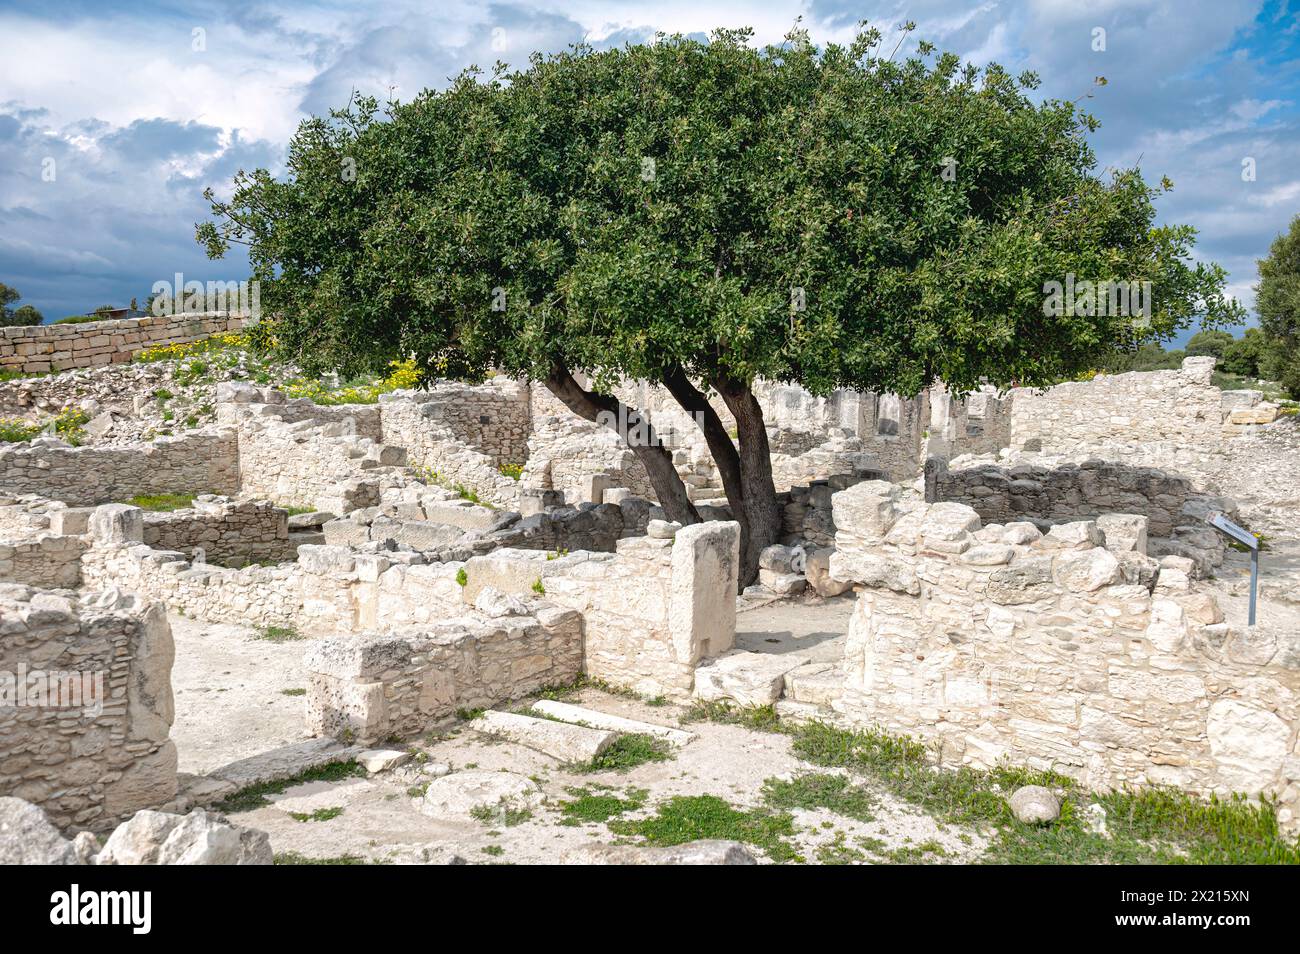 Vibrant tree stands tall amid old stone ruins of Roman house under a dramatic cloudy sky. Kourion archaeological site. Limassol District Stock Photo